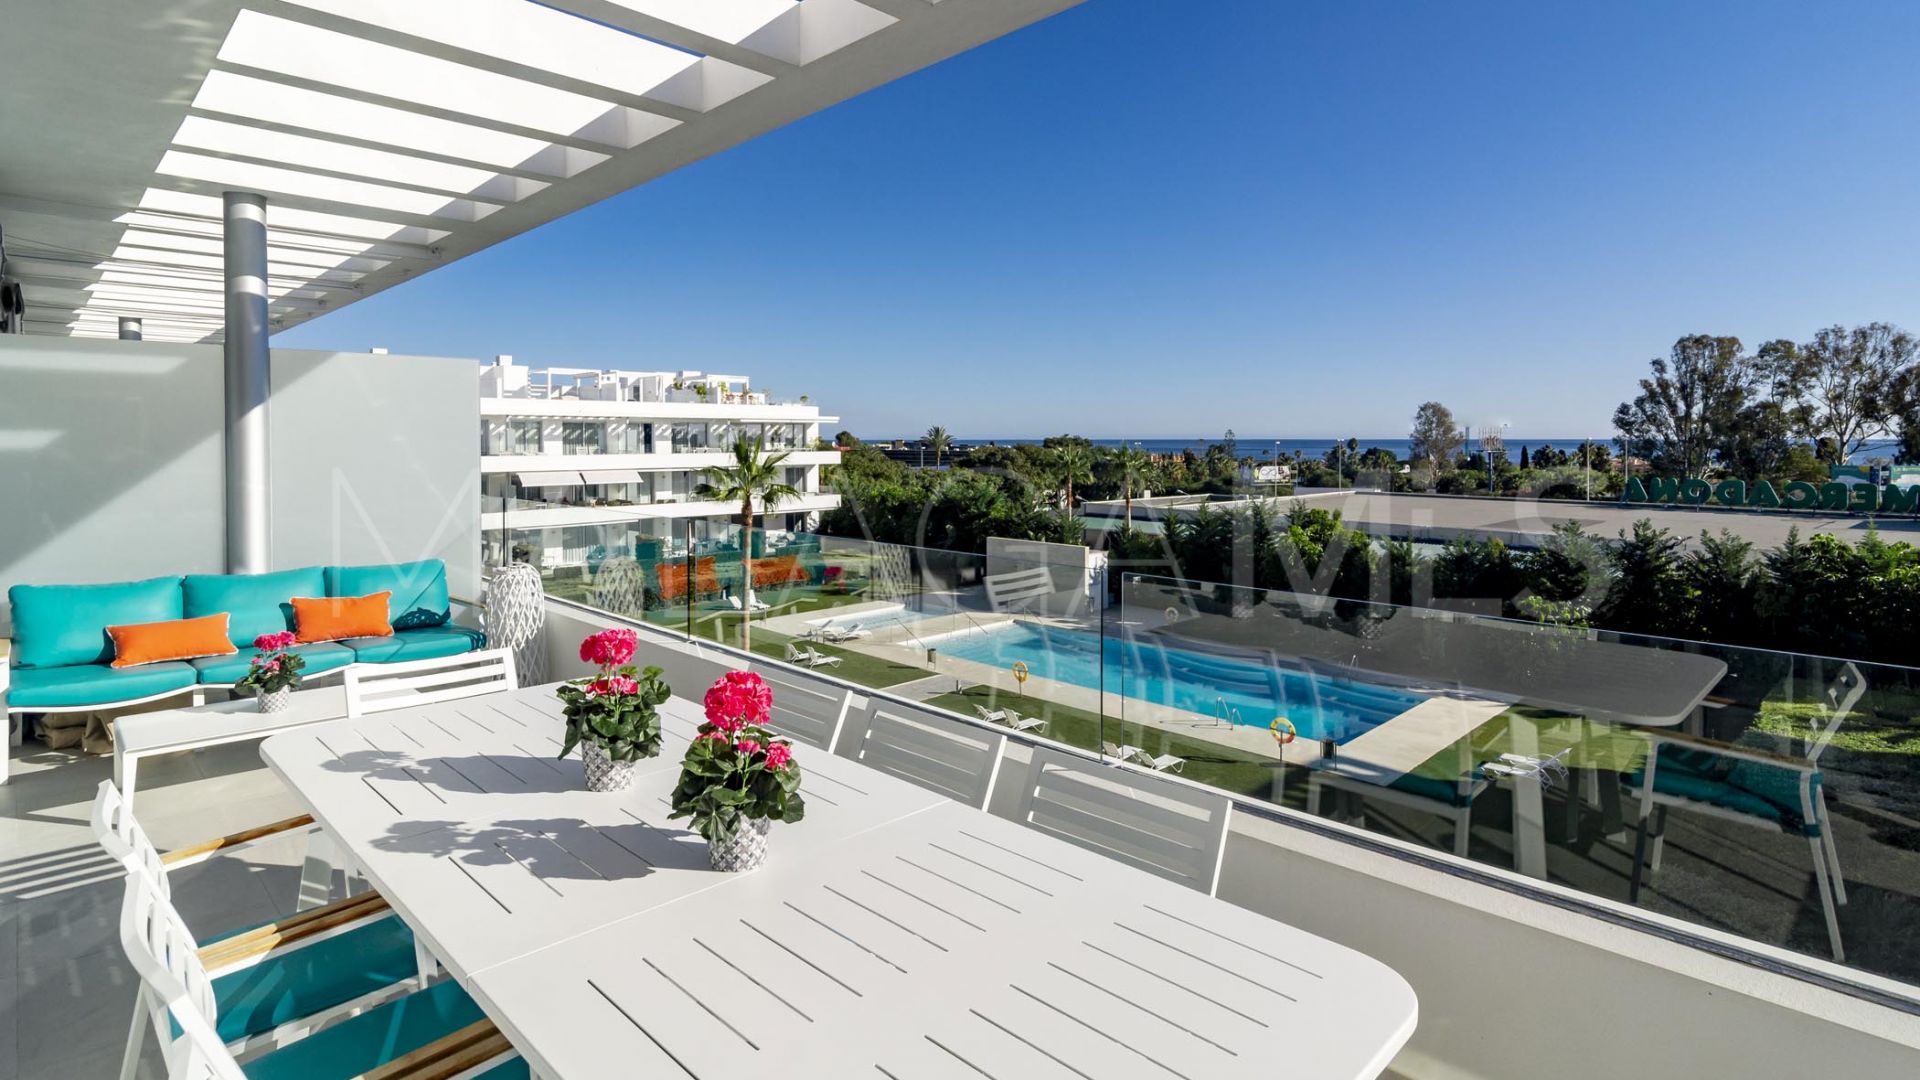 Atico for sale with 4 bedrooms in Estepona